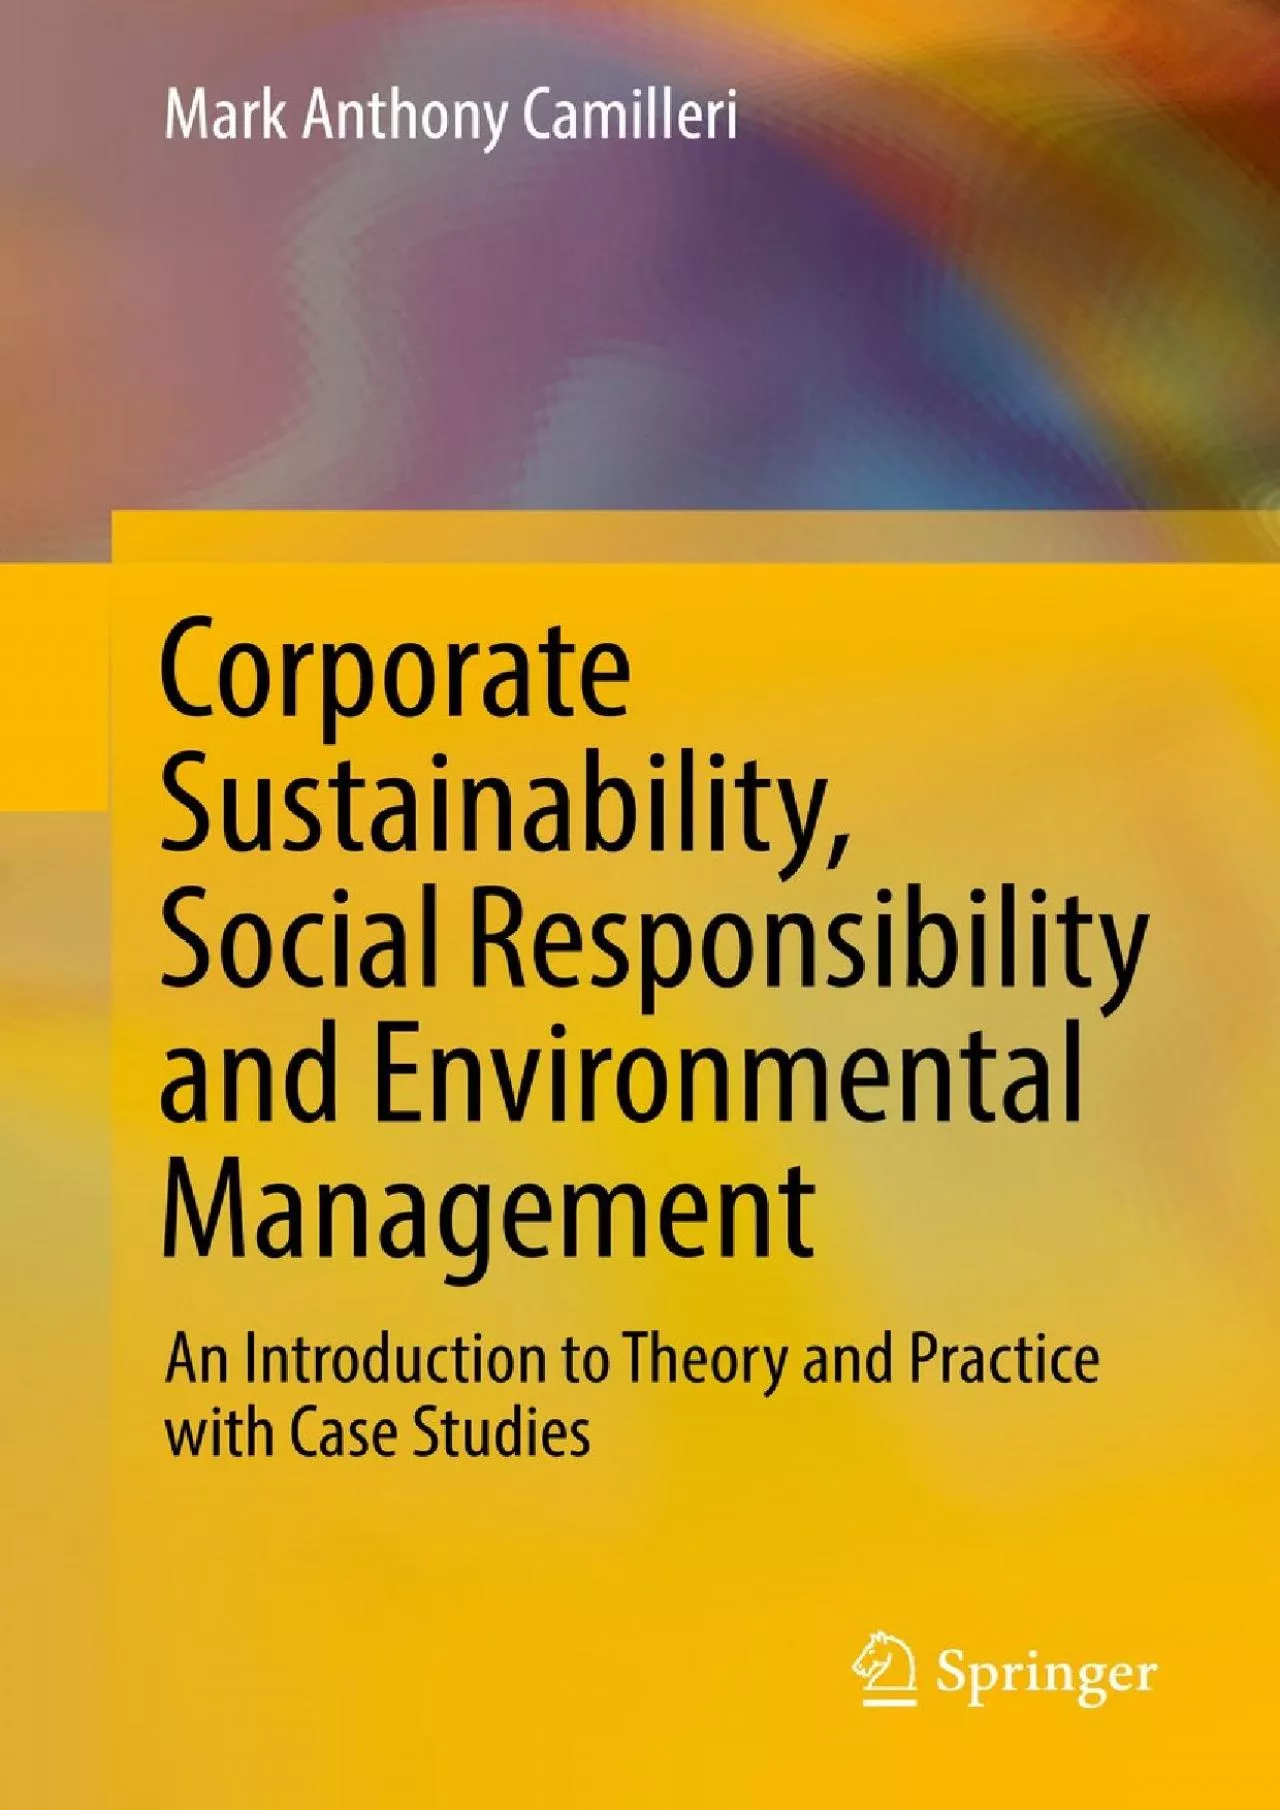 (BOOS)-Corporate Sustainability, Social Responsibility and Environmental Management: An